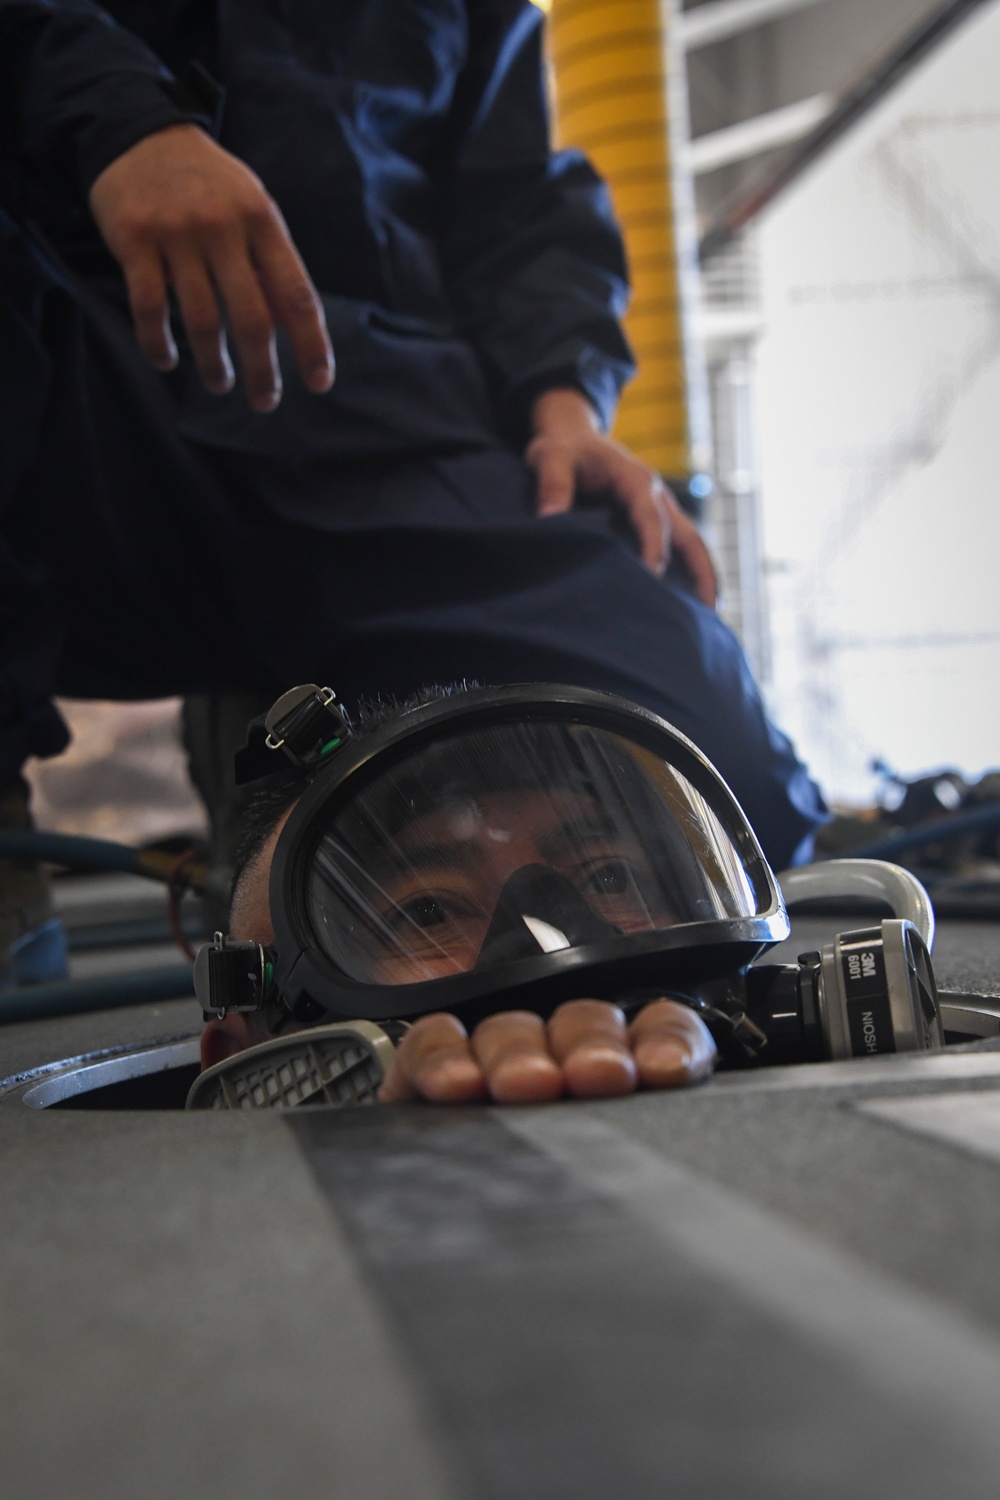 Airmen and Firefighters partner for training during confined space rescue exercise.